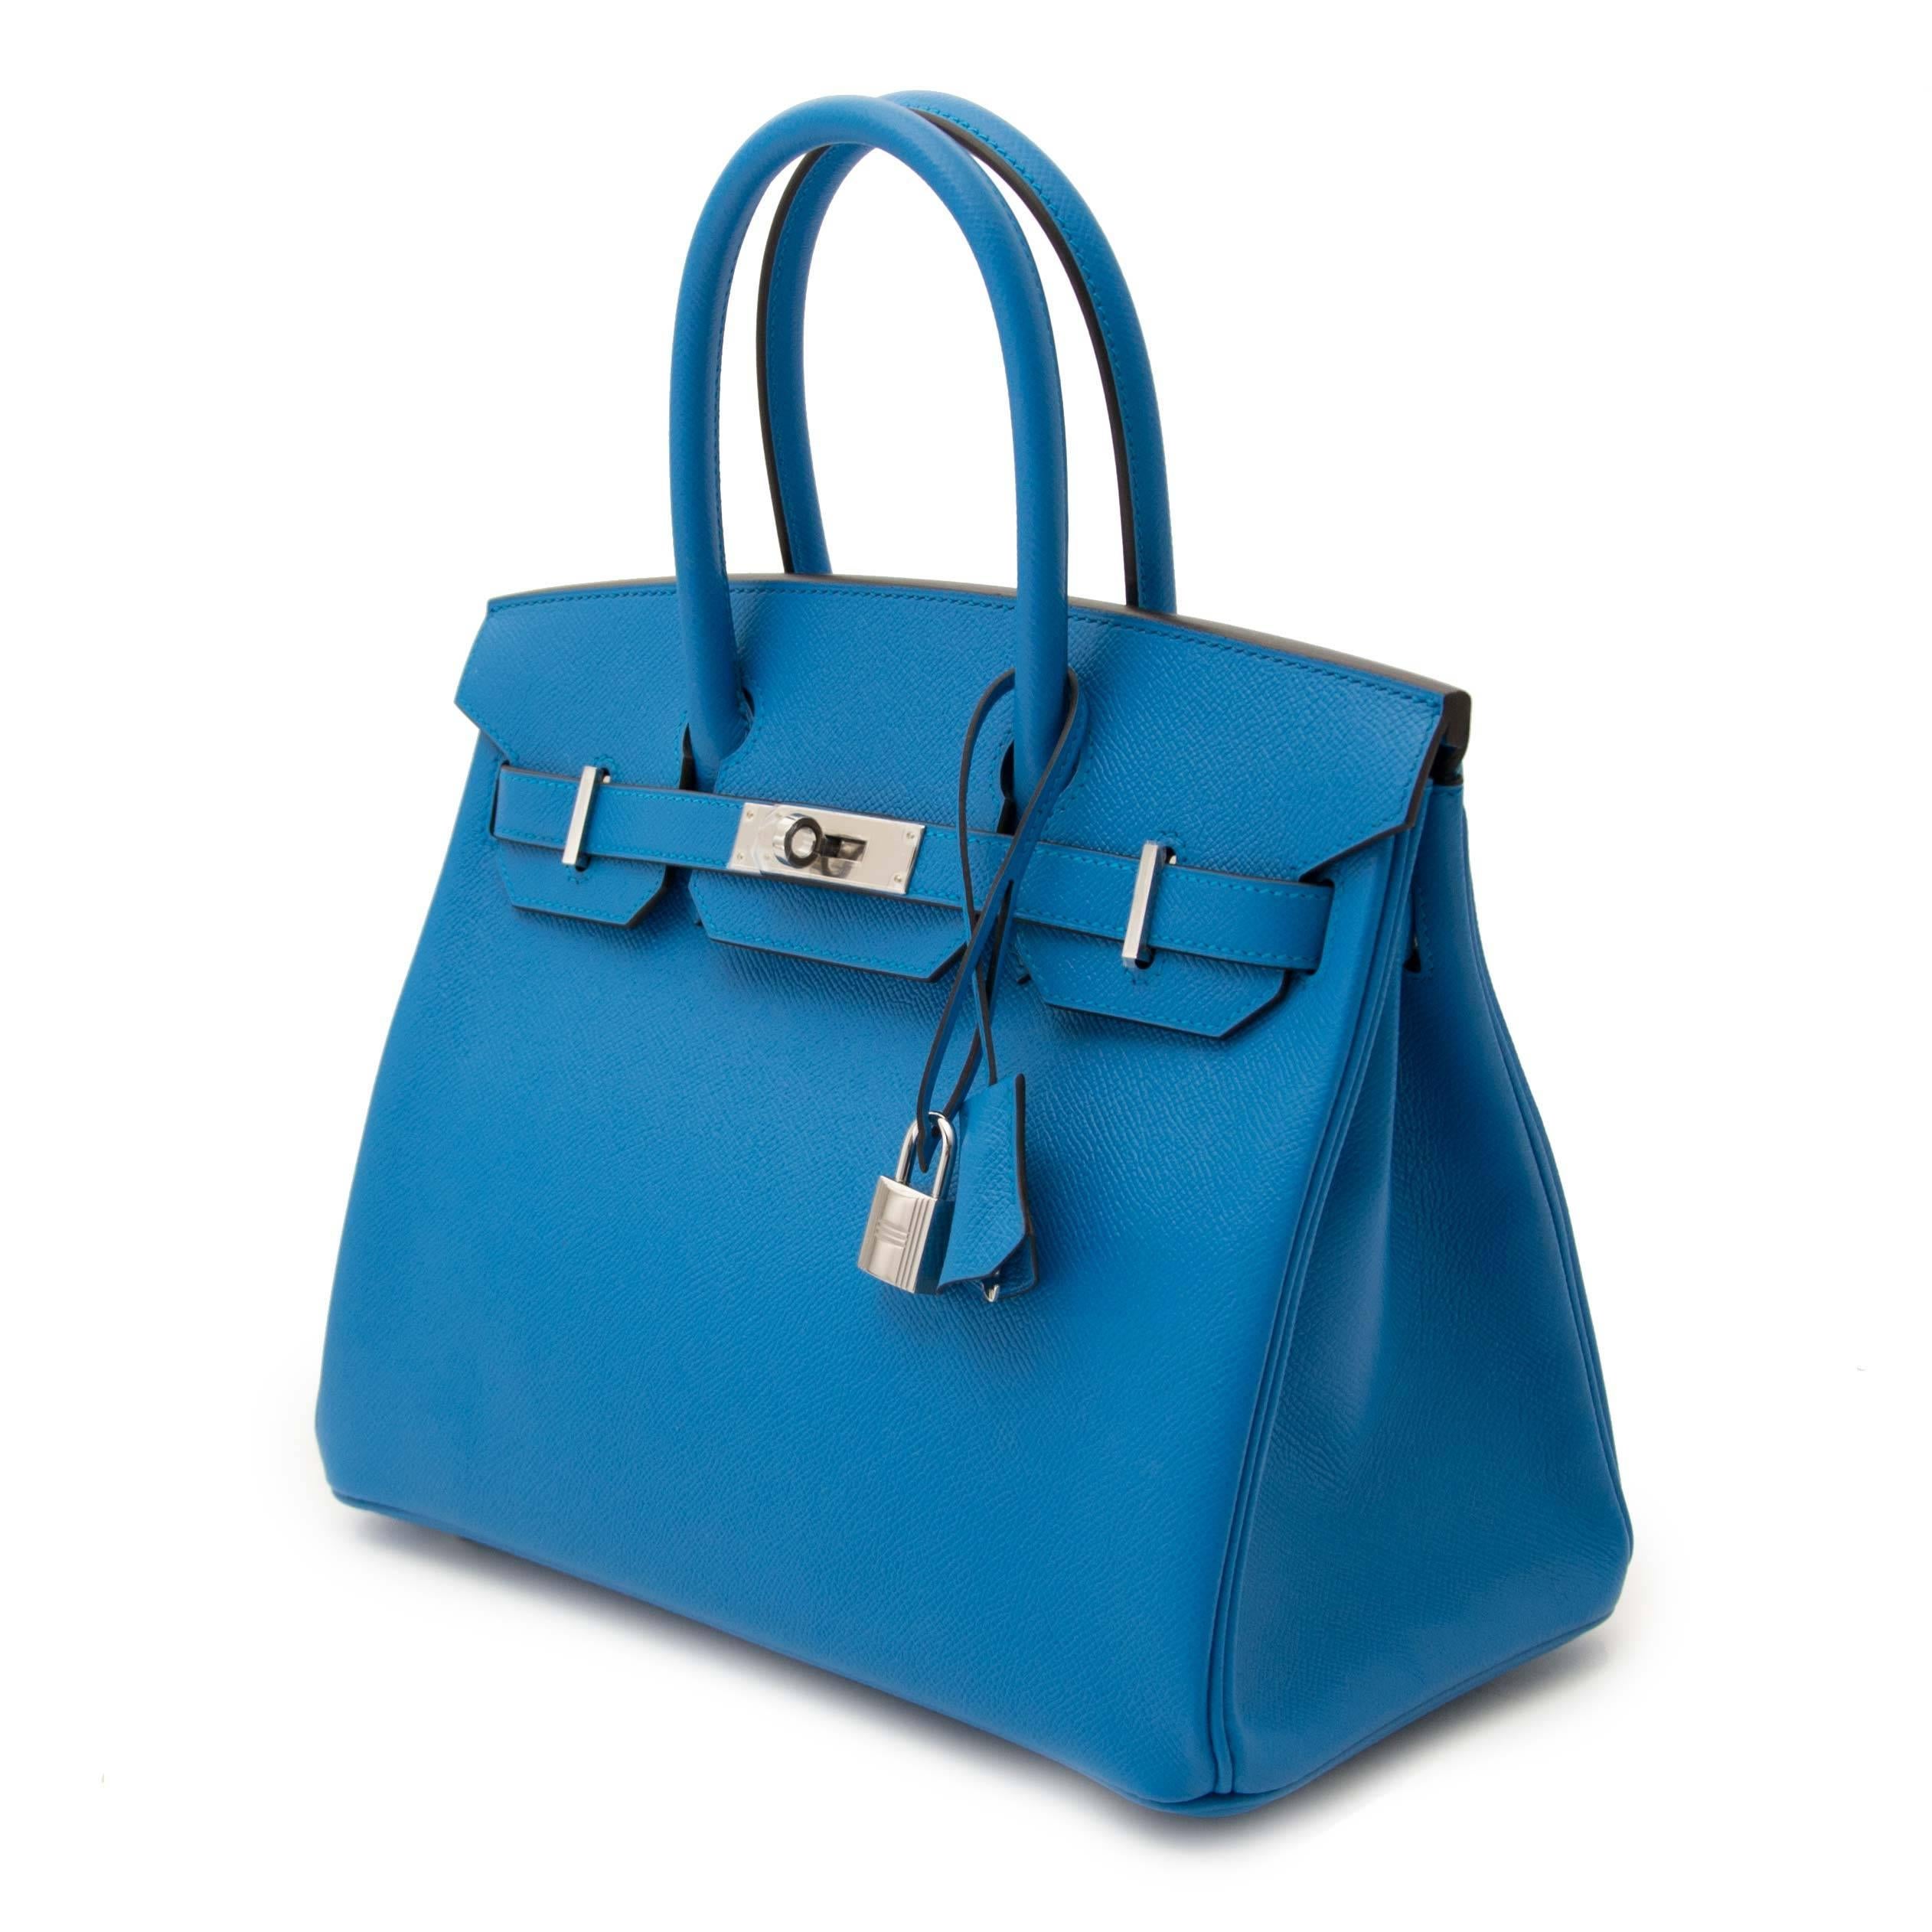 Never Used

Never Used Hermes Birkin 30 Bleu Zanzibar Epsom

This never used Birkin bag is the proof of the craftsmanship of the house of Hermès. It's not only the most sought after bag in the world, but also offers superior quality and impeccable